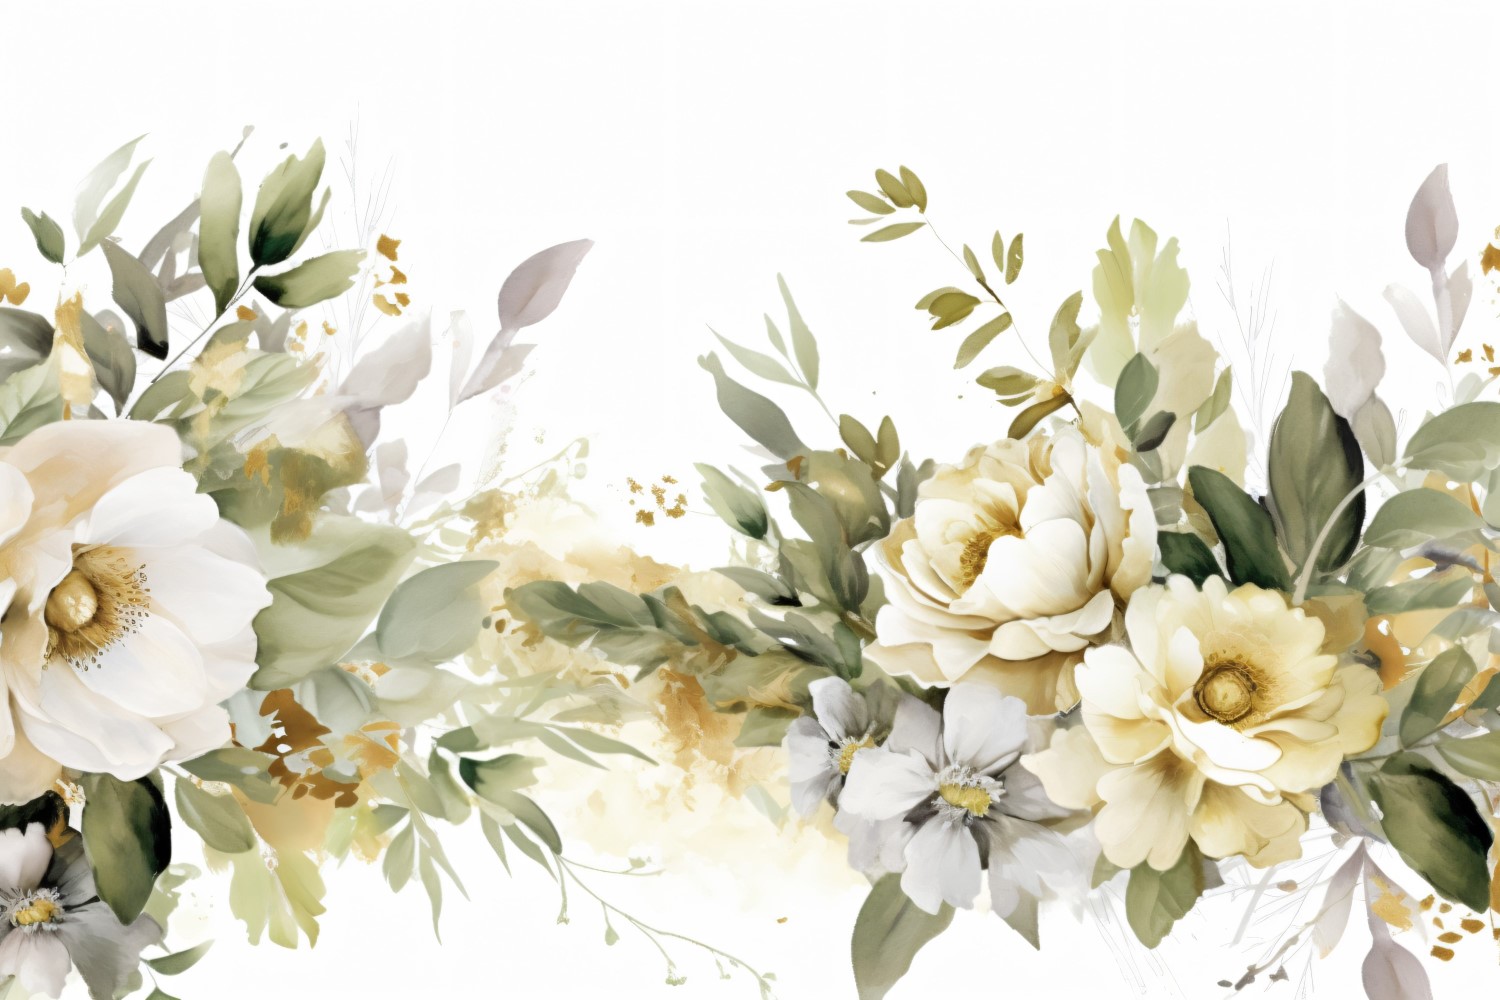 Watercolor flowers Background 509